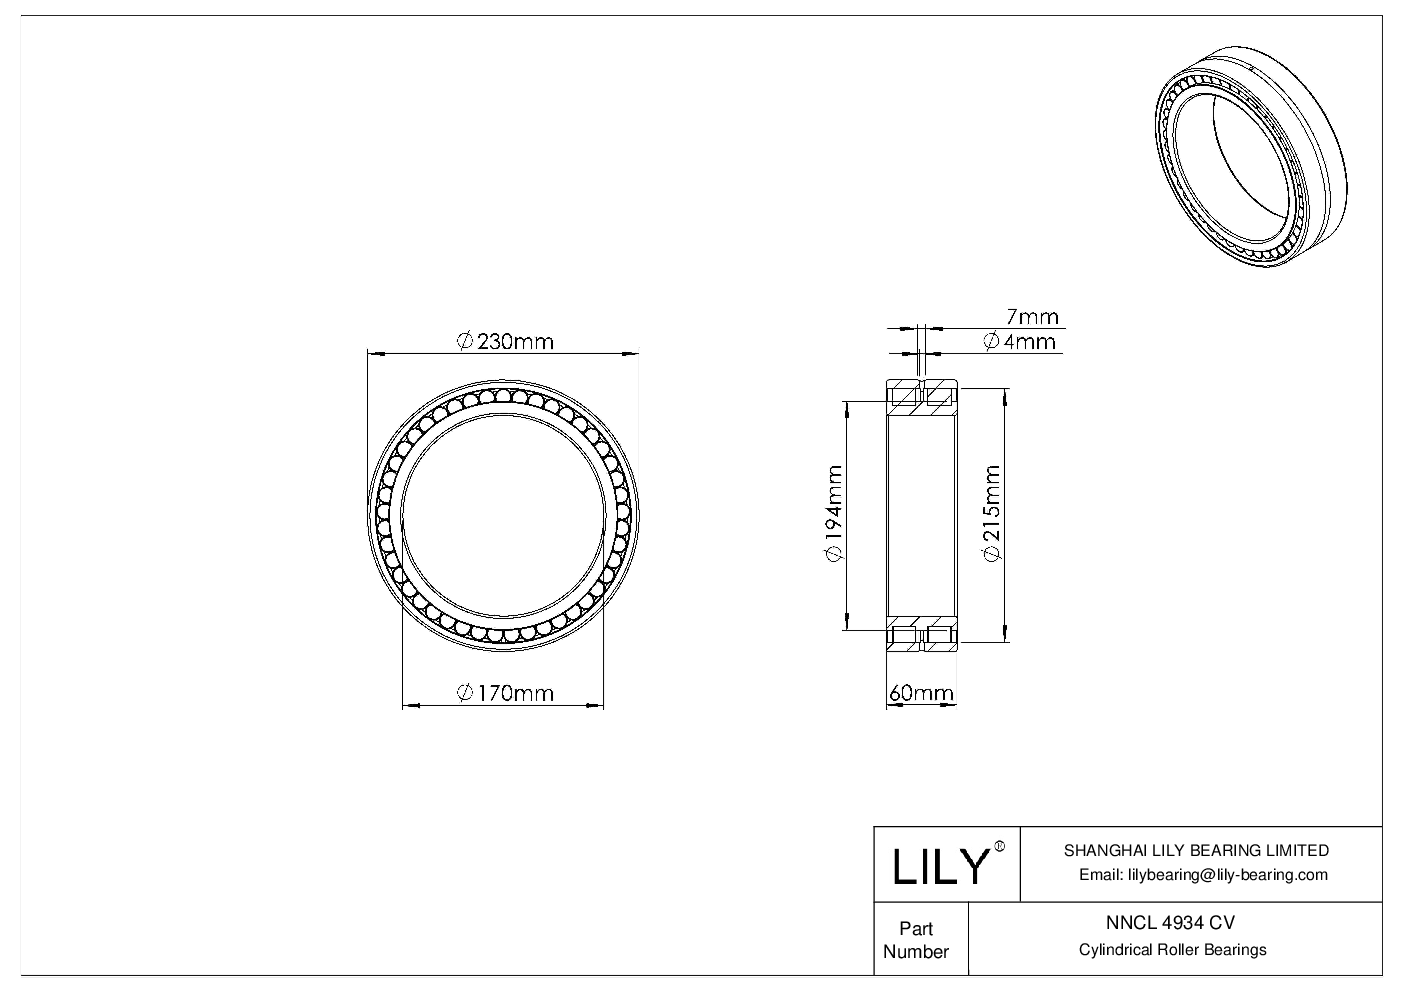 NNCL 4934 CV Double Row Full Complement Cylindrical Roller Bearings cad drawing